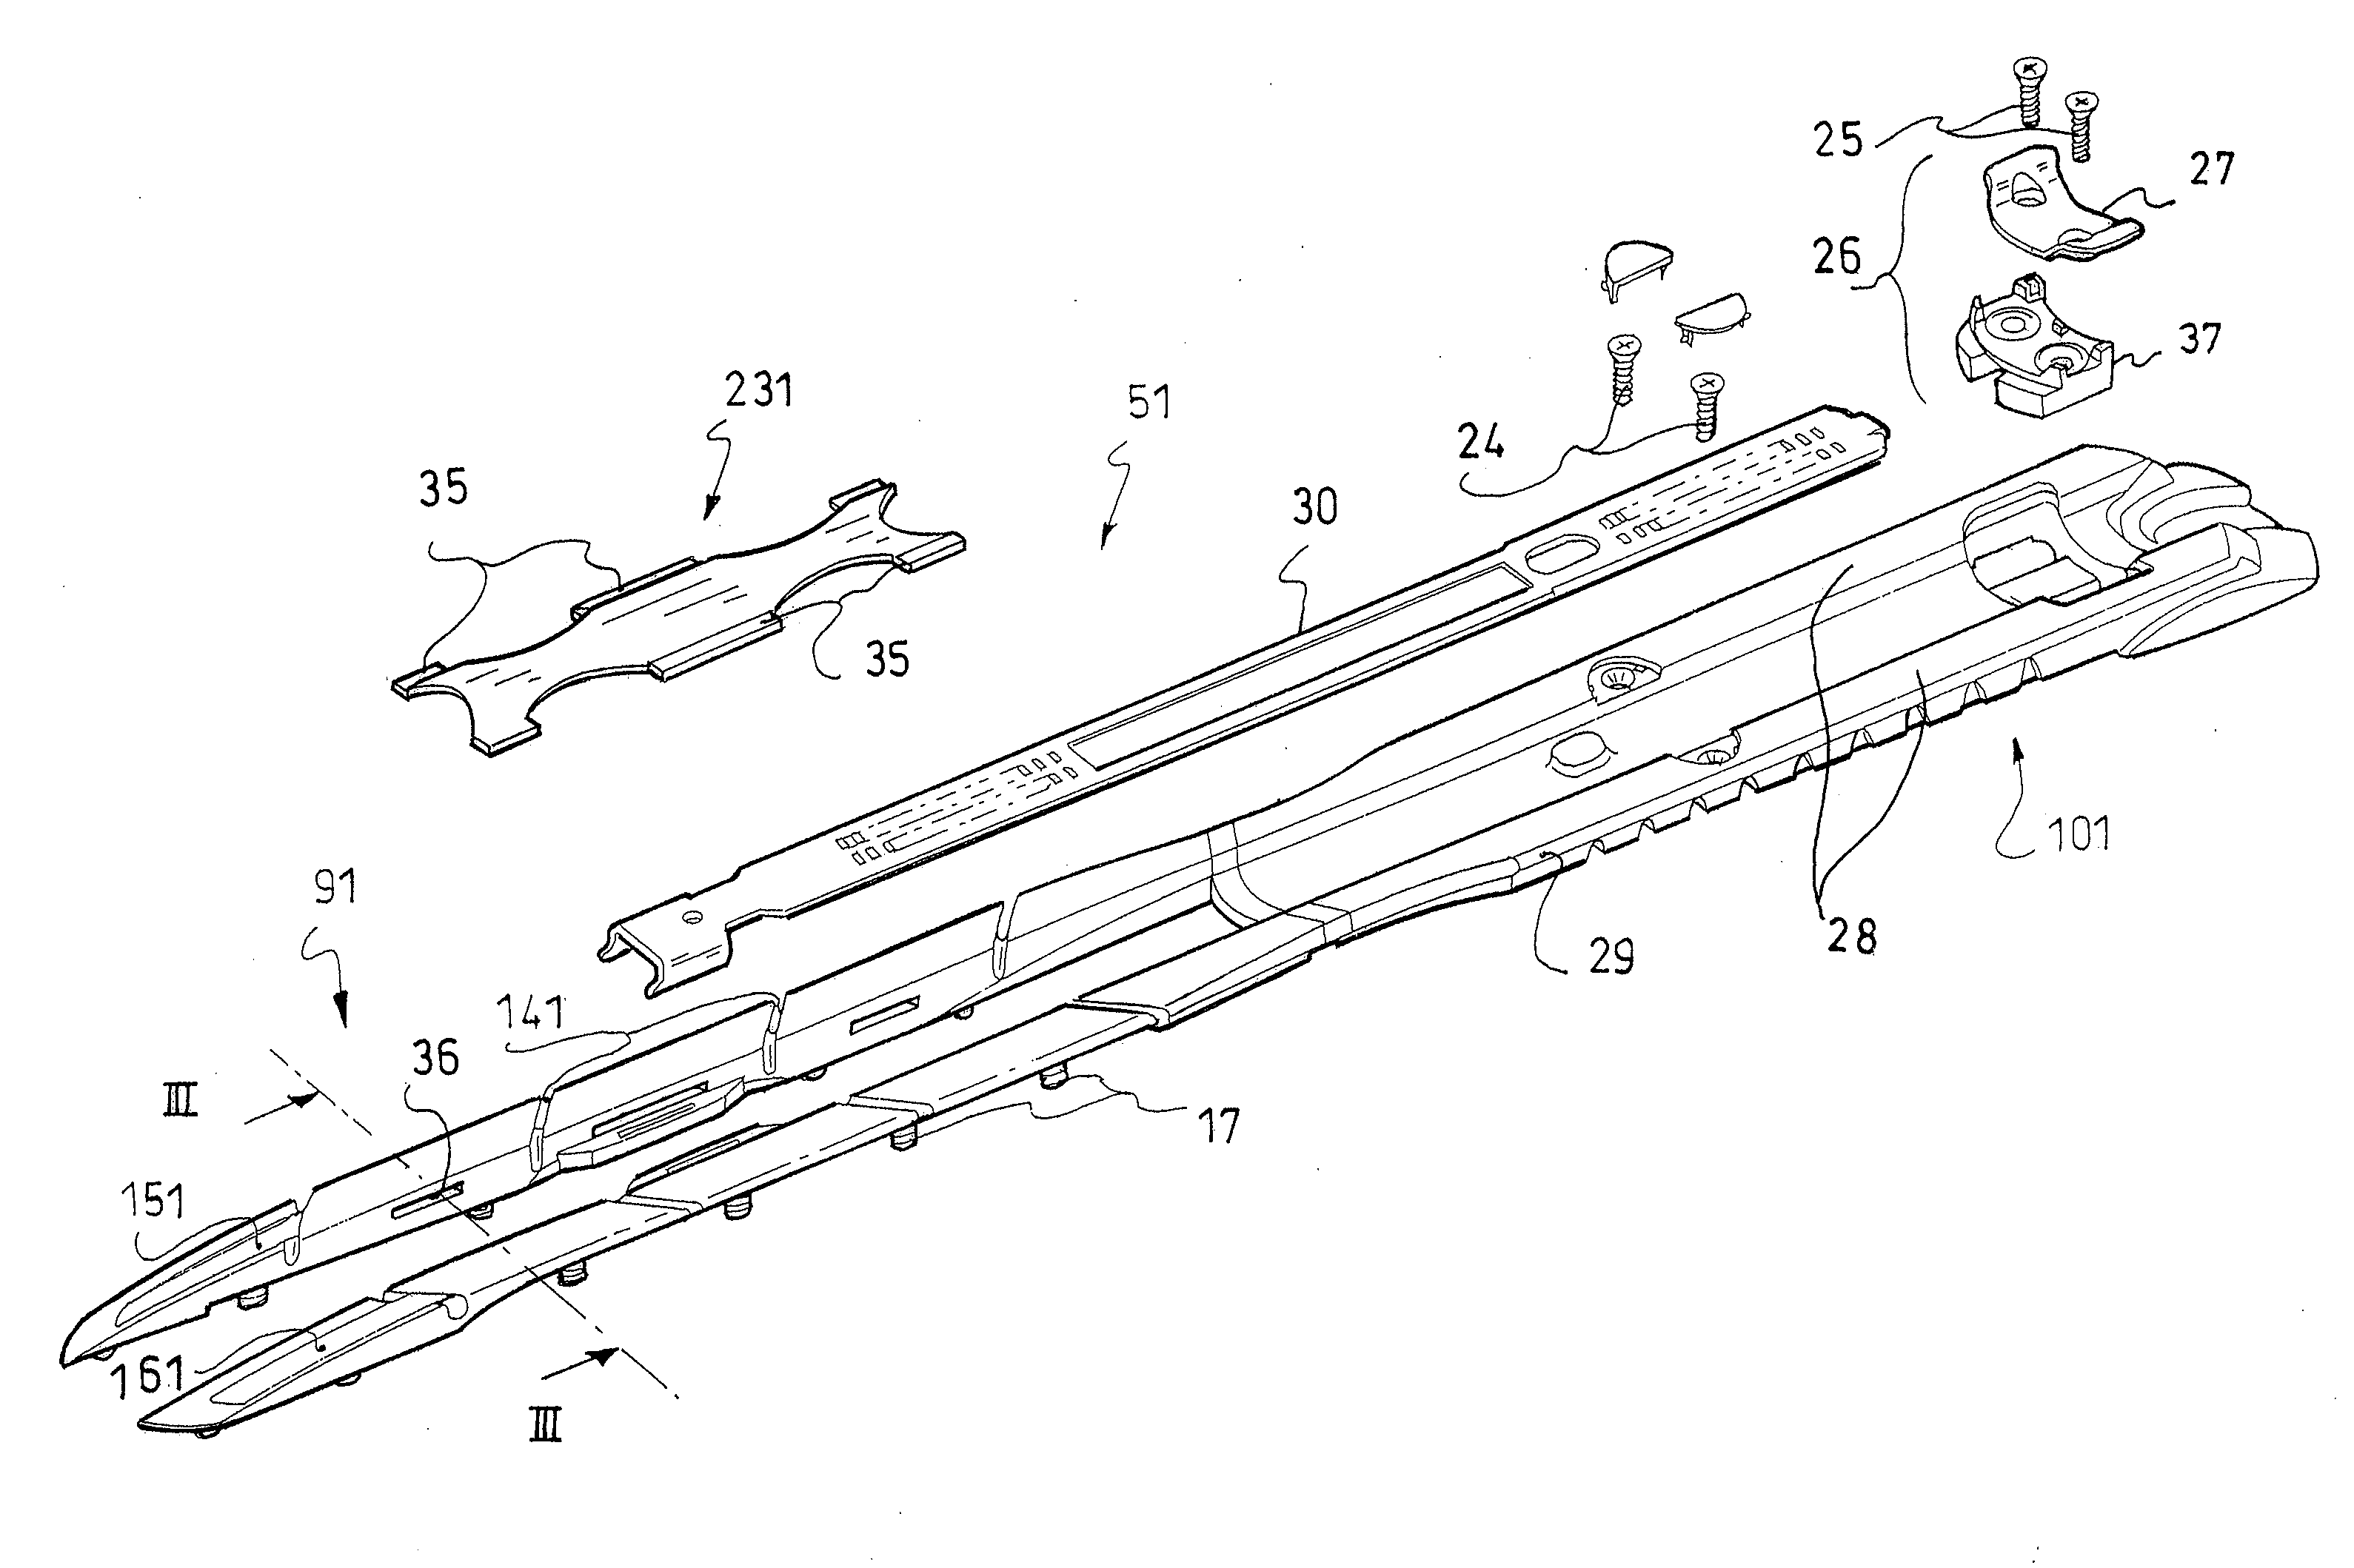 Interface device for a gliding board